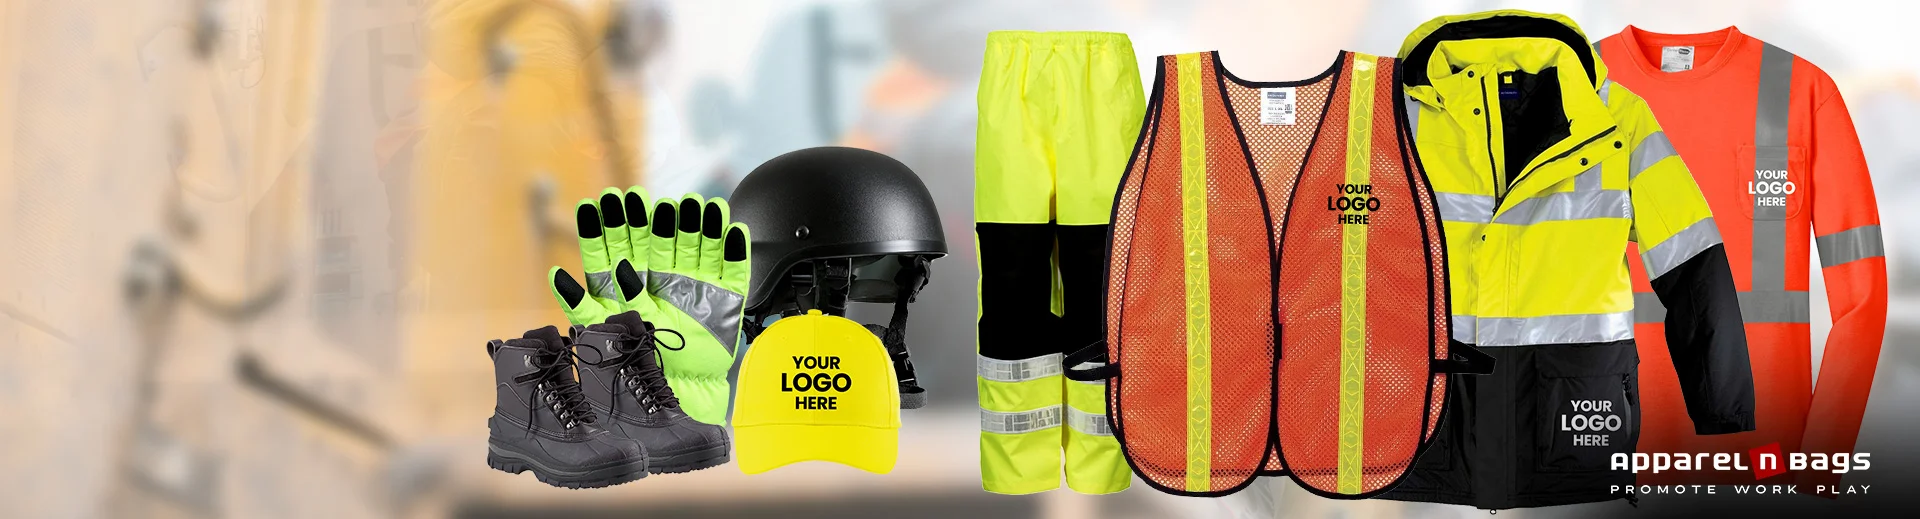 Cheap Custom Hi-Vis Safety Reflective Clothing Protective Coverall